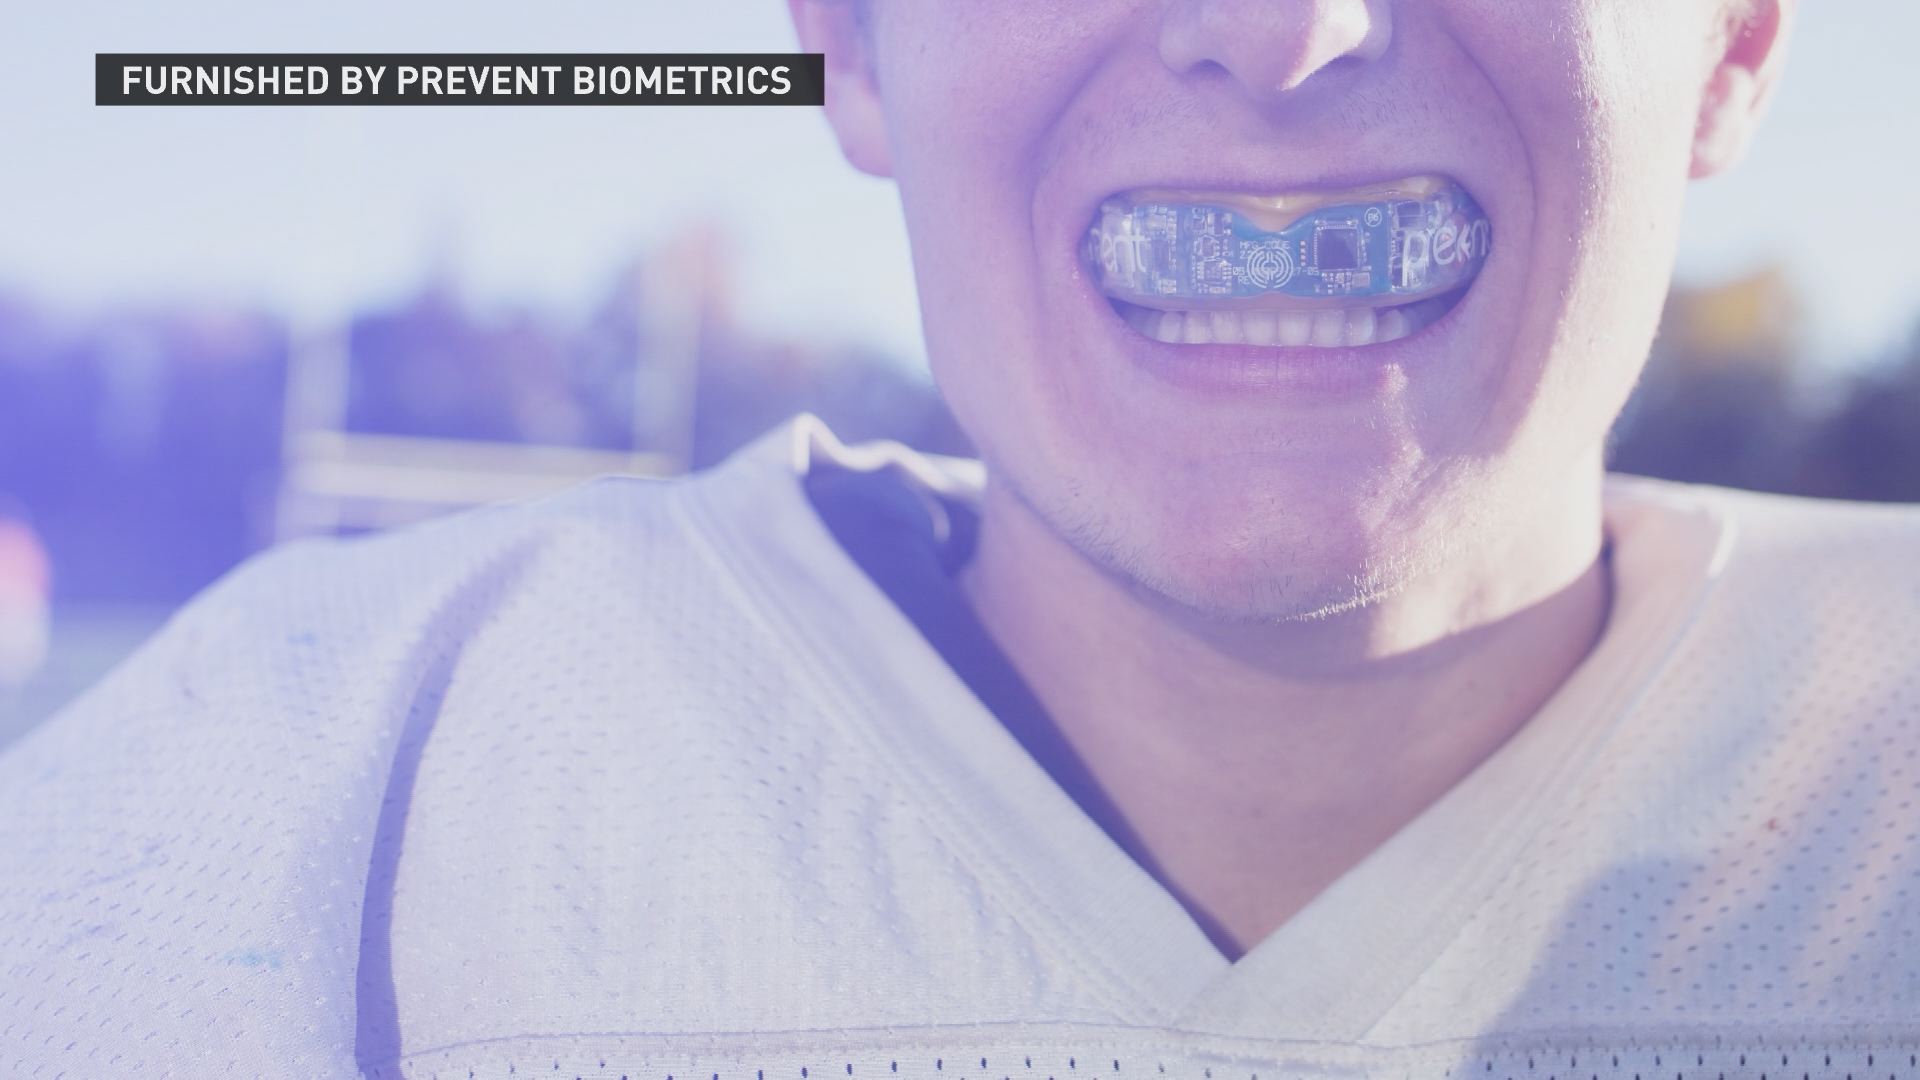 Mouth guard to detect concussion hits